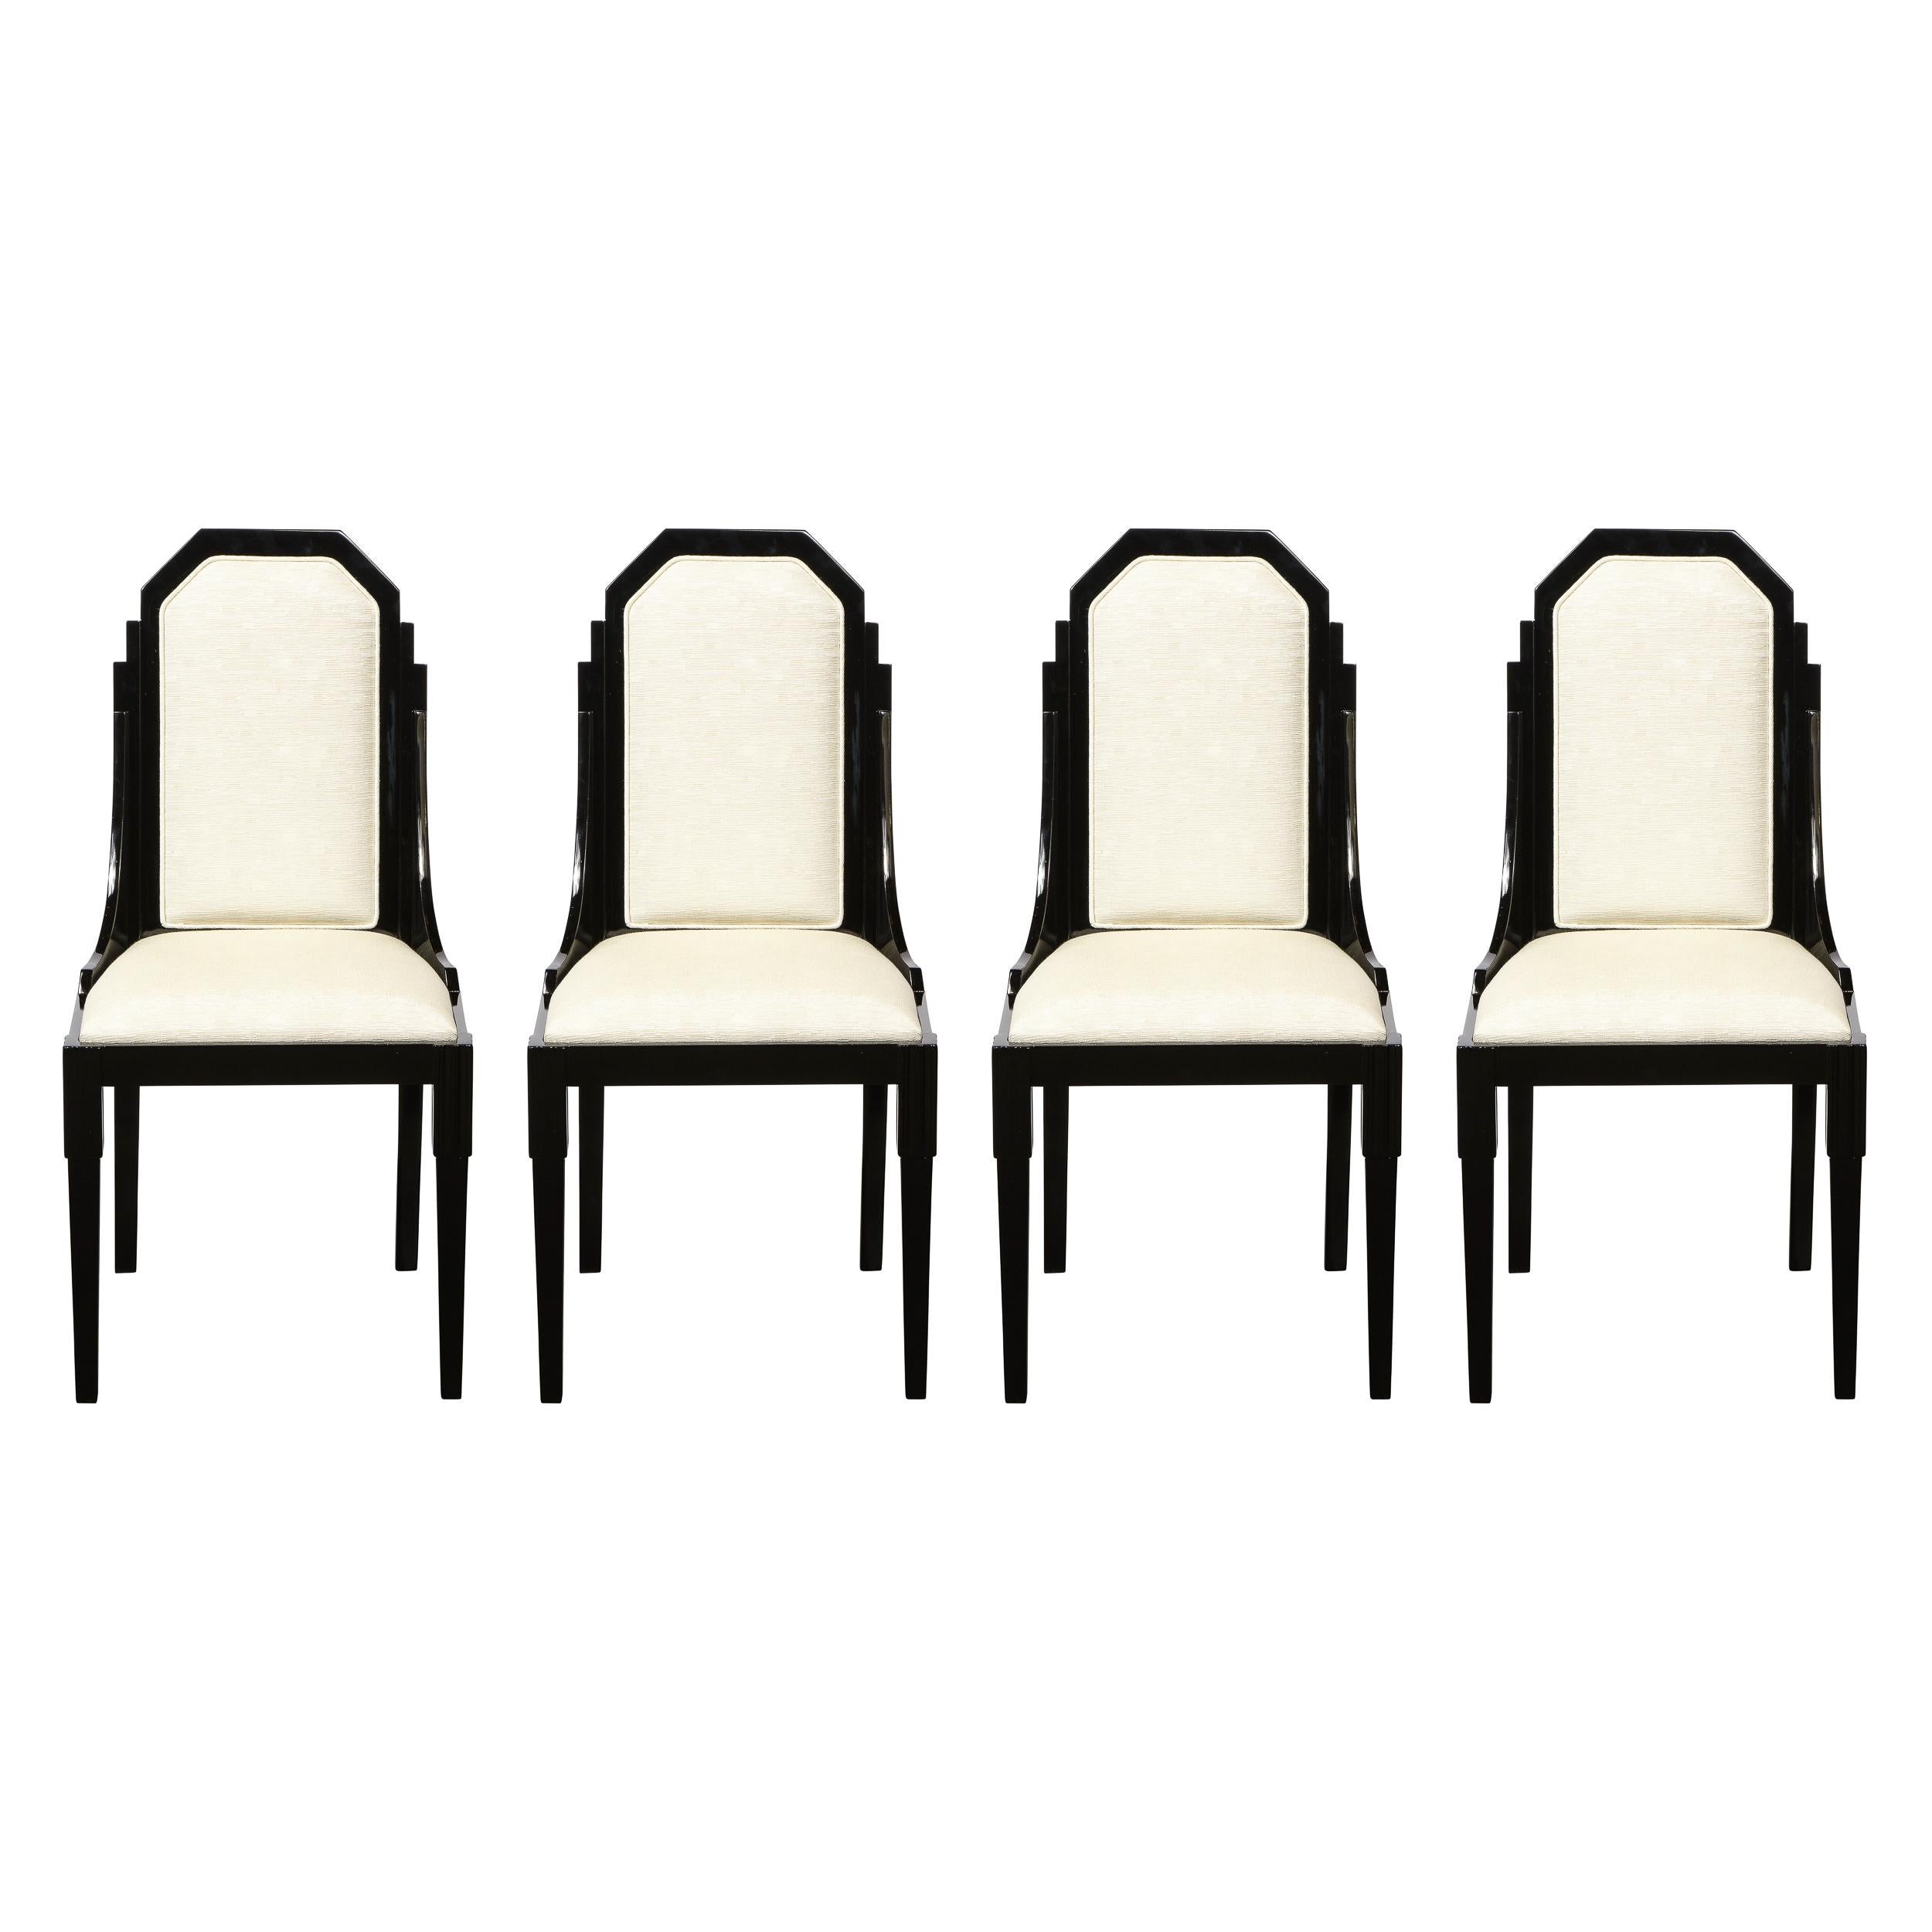 This stunning and graphic set of Art Deco Machine Age dining chairs were realized in the United States circa 1935. They features streamlined sides; subtly bowed hind legs and tapered front legs with skyscraper style detailing at their apex. The